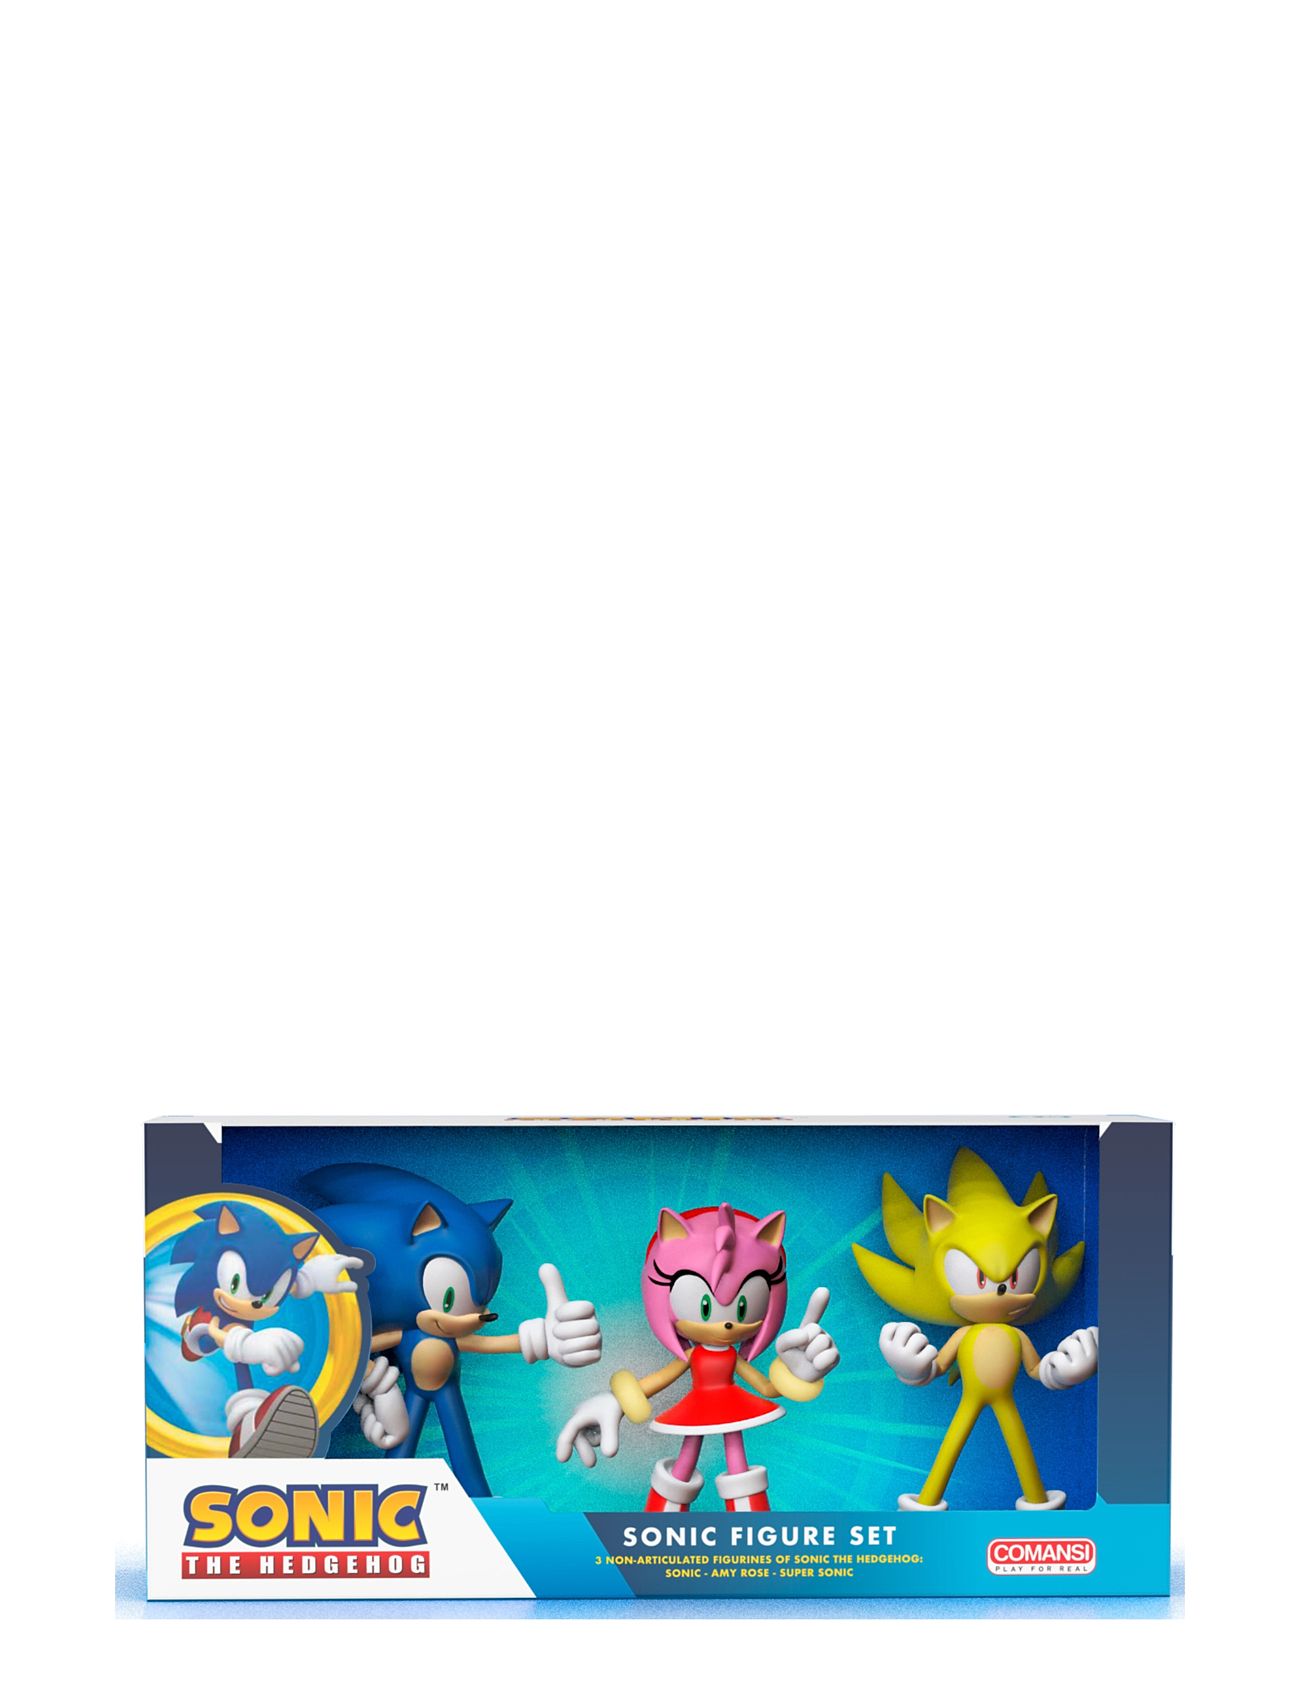 Sonic Gift Box Set 3 Figurines Toys Playsets & Action Figures Movies & Fairy Tale Characters Multi/patterned Comansi